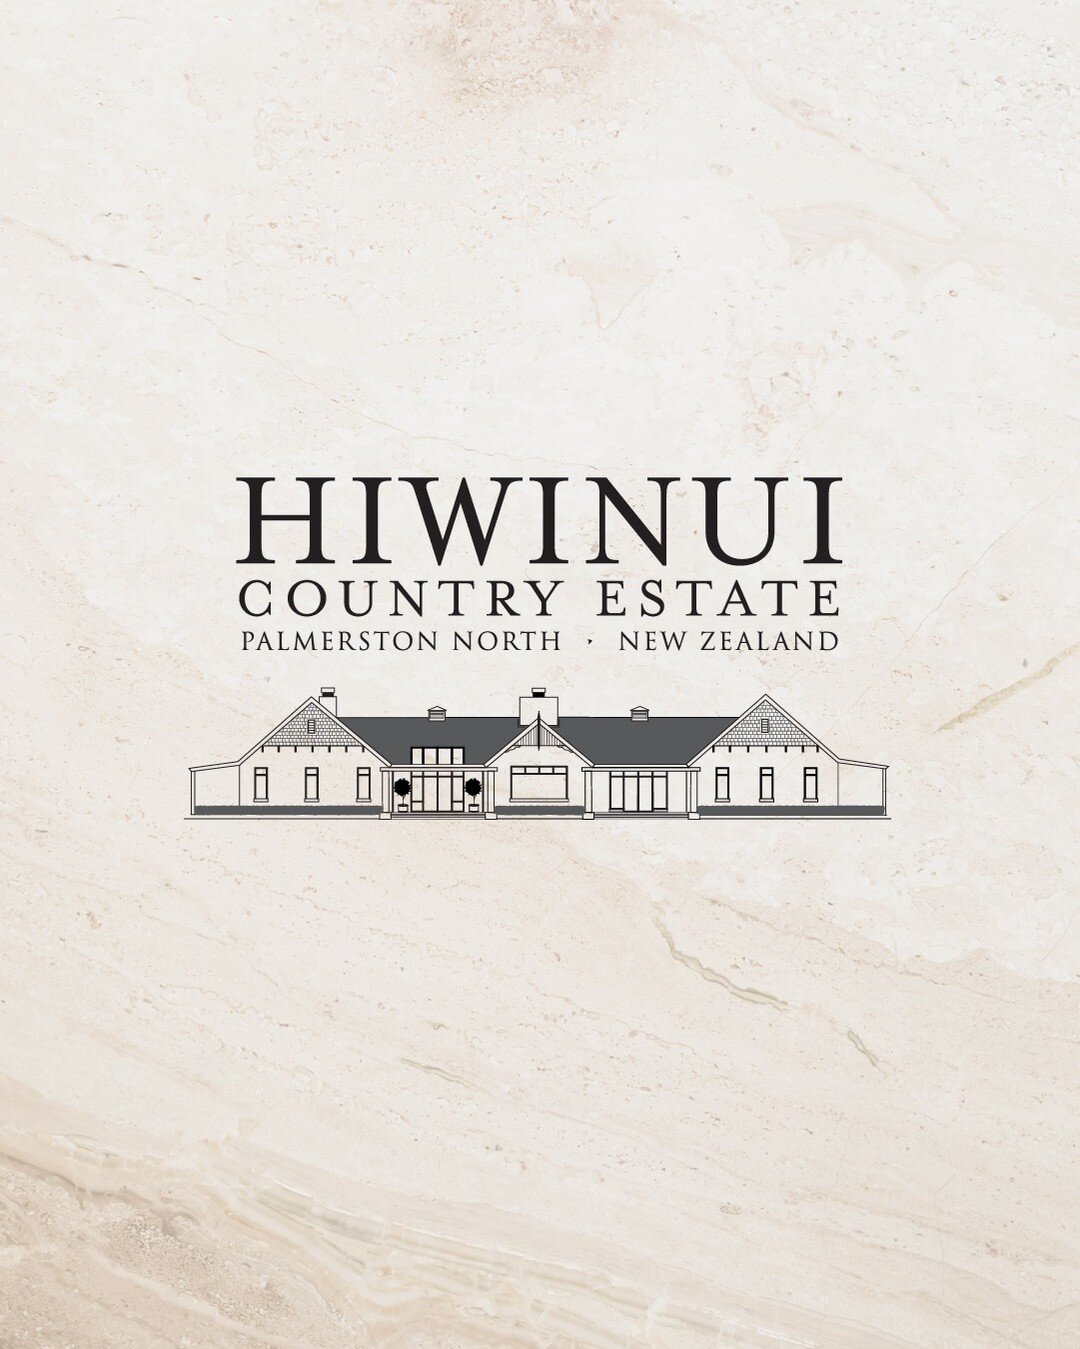 Another throw-back!
One of my first projects as Karina Kagei Design!

A rebrand for @hiwinuicountryestate that could adapt and grow with the business while maintaining a sense of family history. I created an illustration of the lodge and hand-picked 